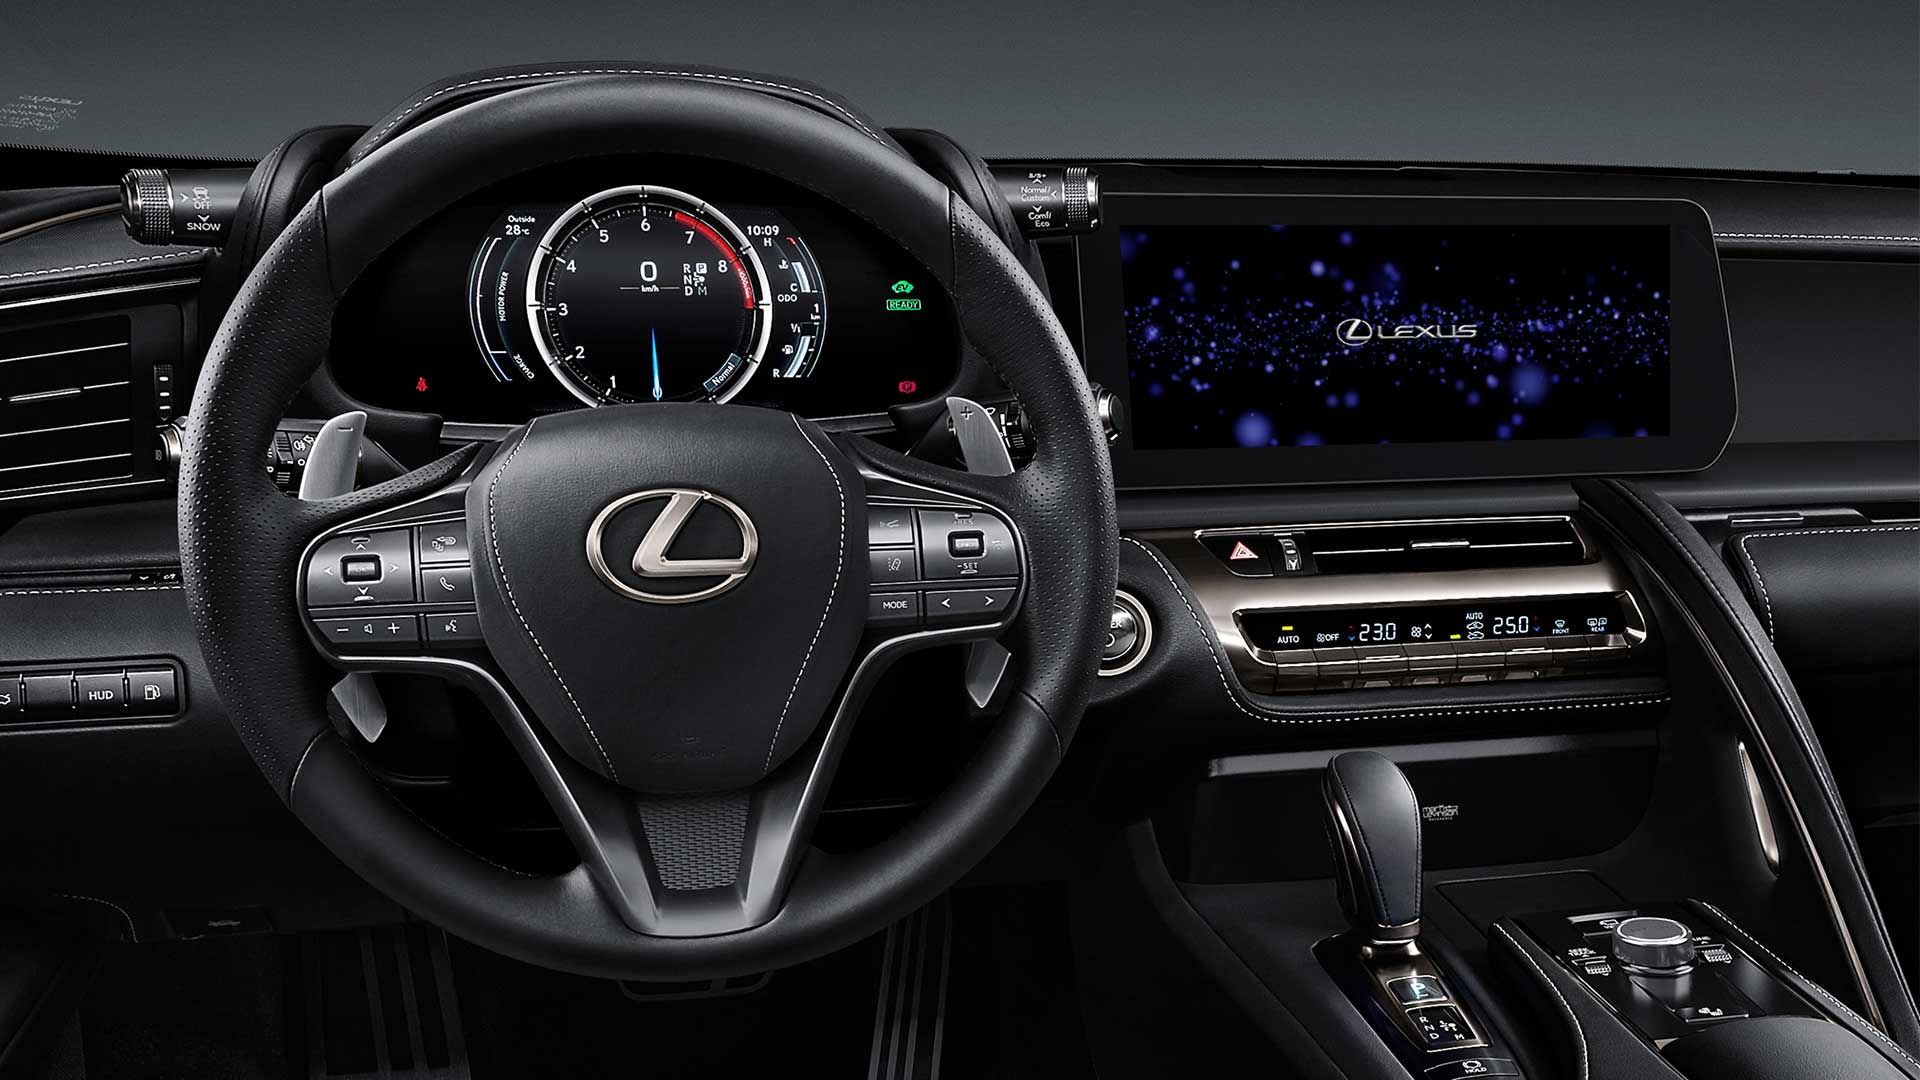 Image of the dashboard and steering wheel in the Lexus LC 500 Coupe.